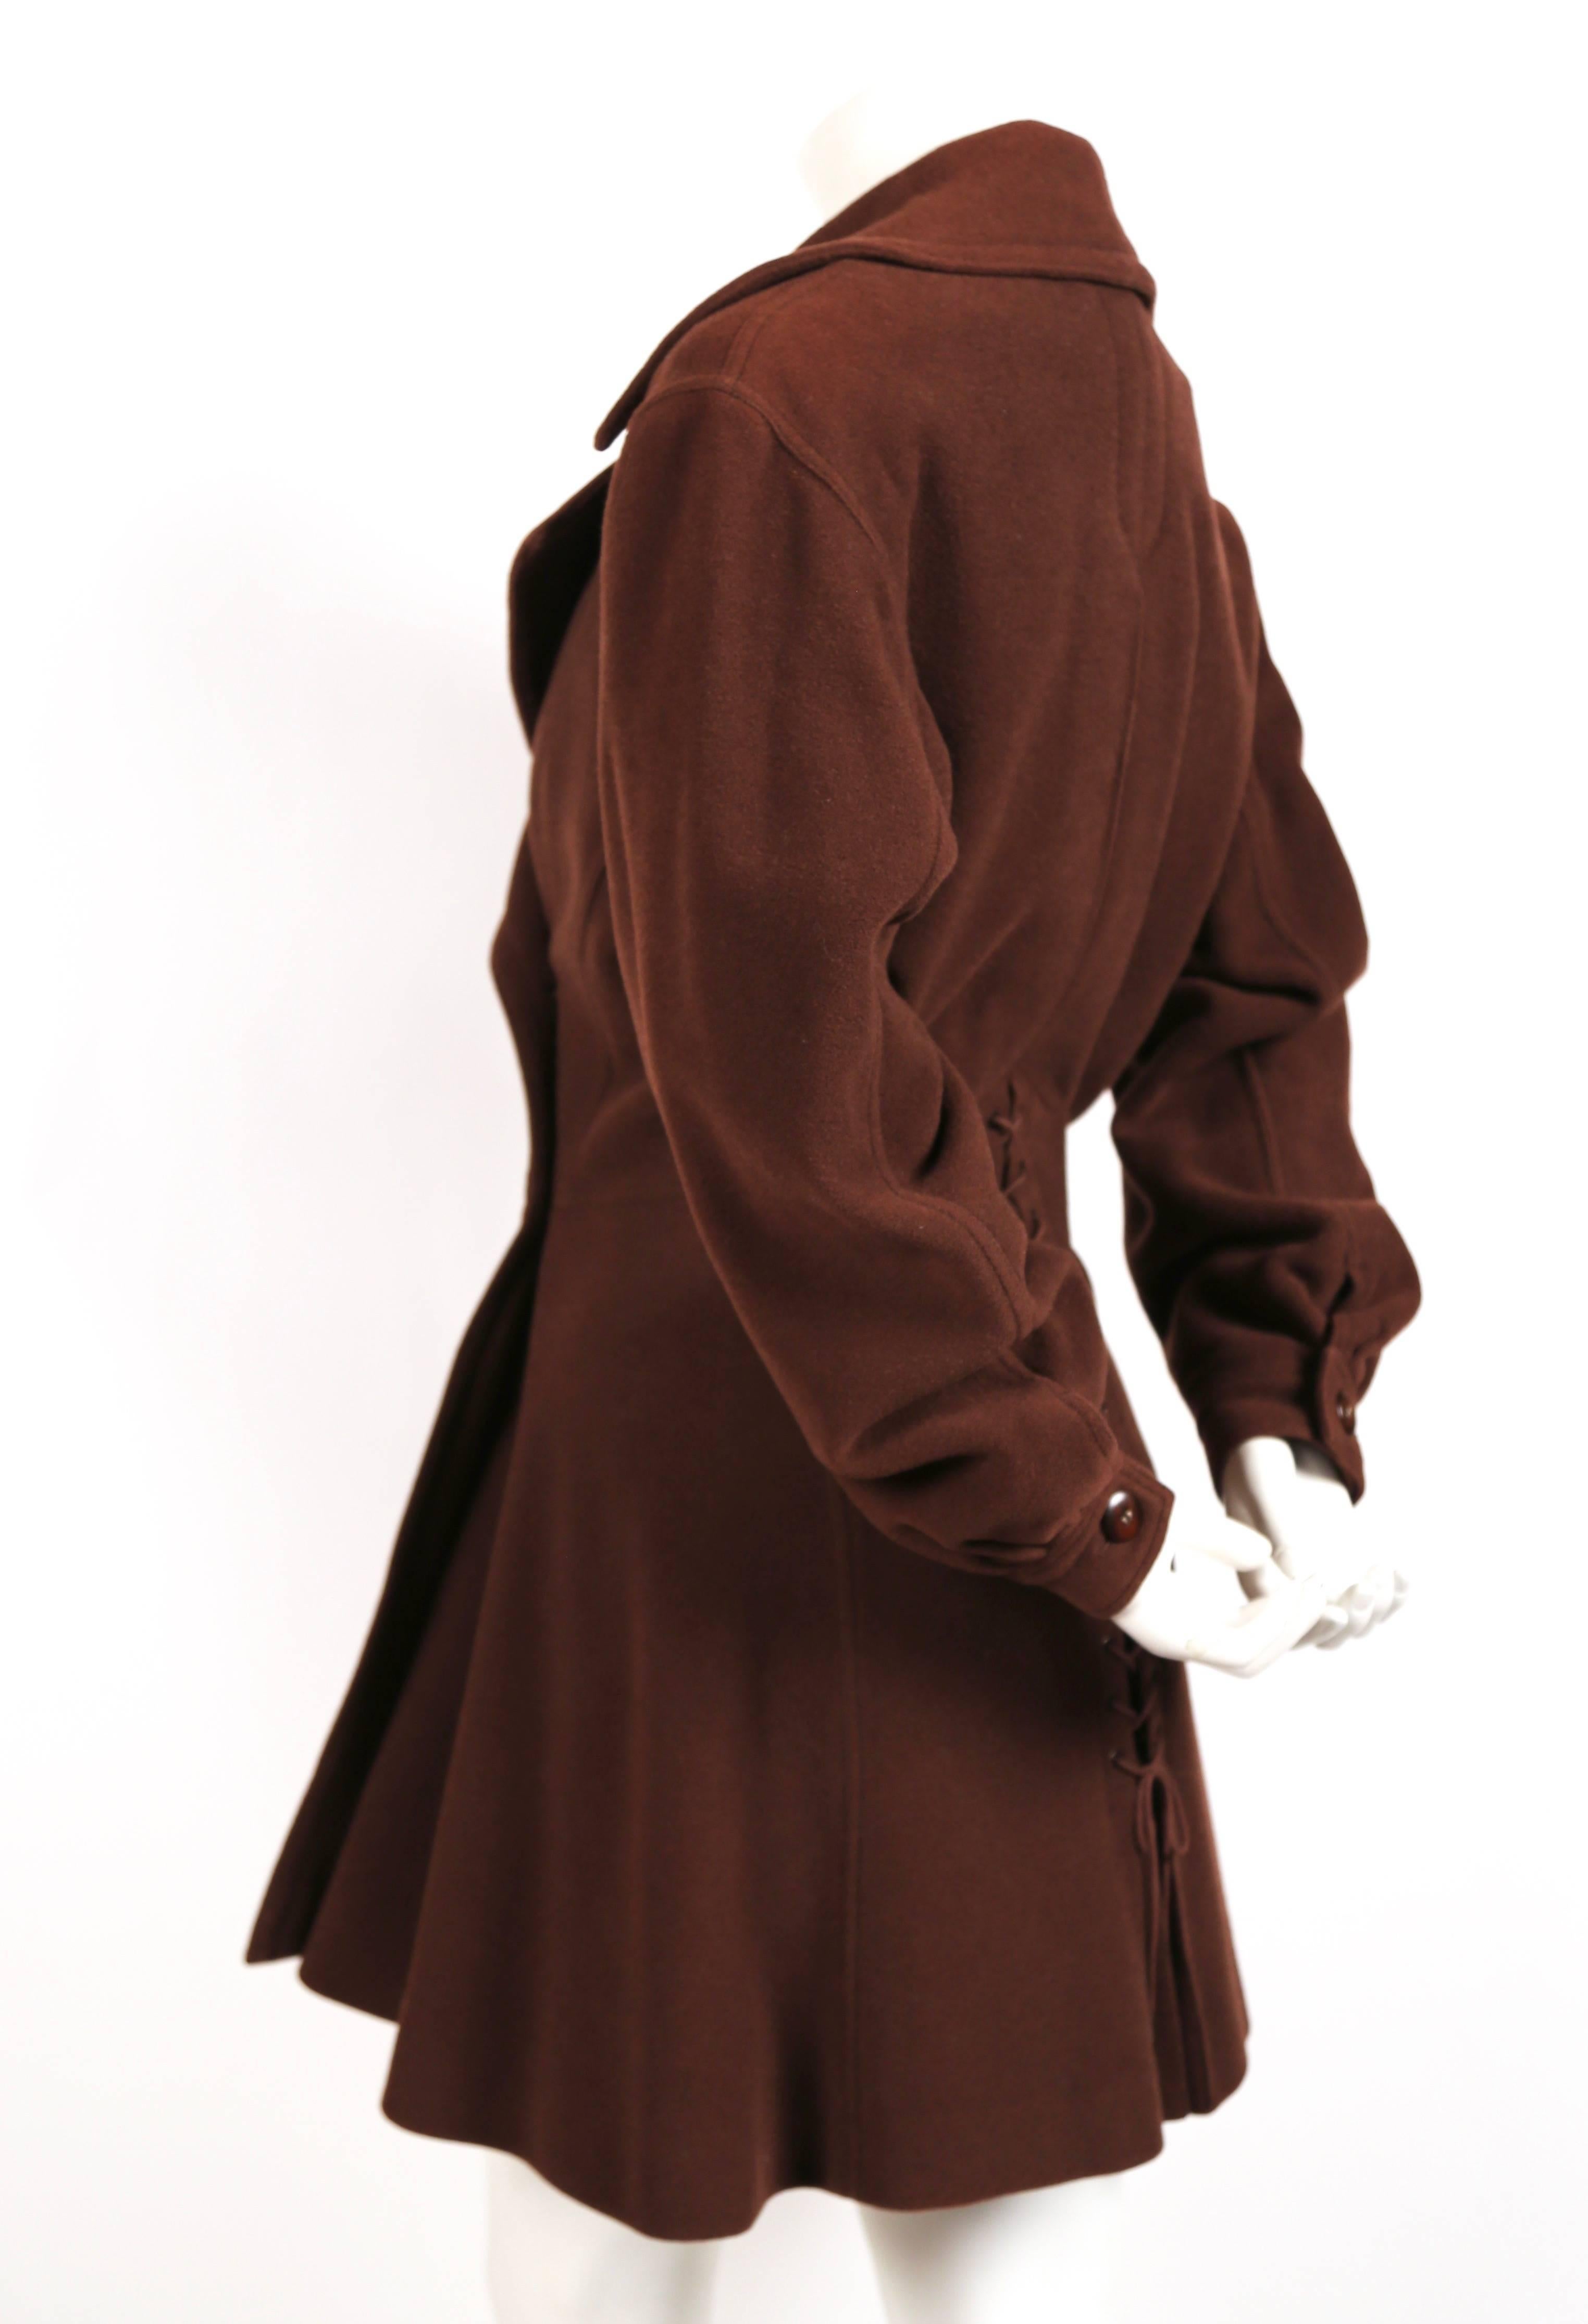 Black 1980's AZZEDINE ALAIA brown wool coat with lace up back